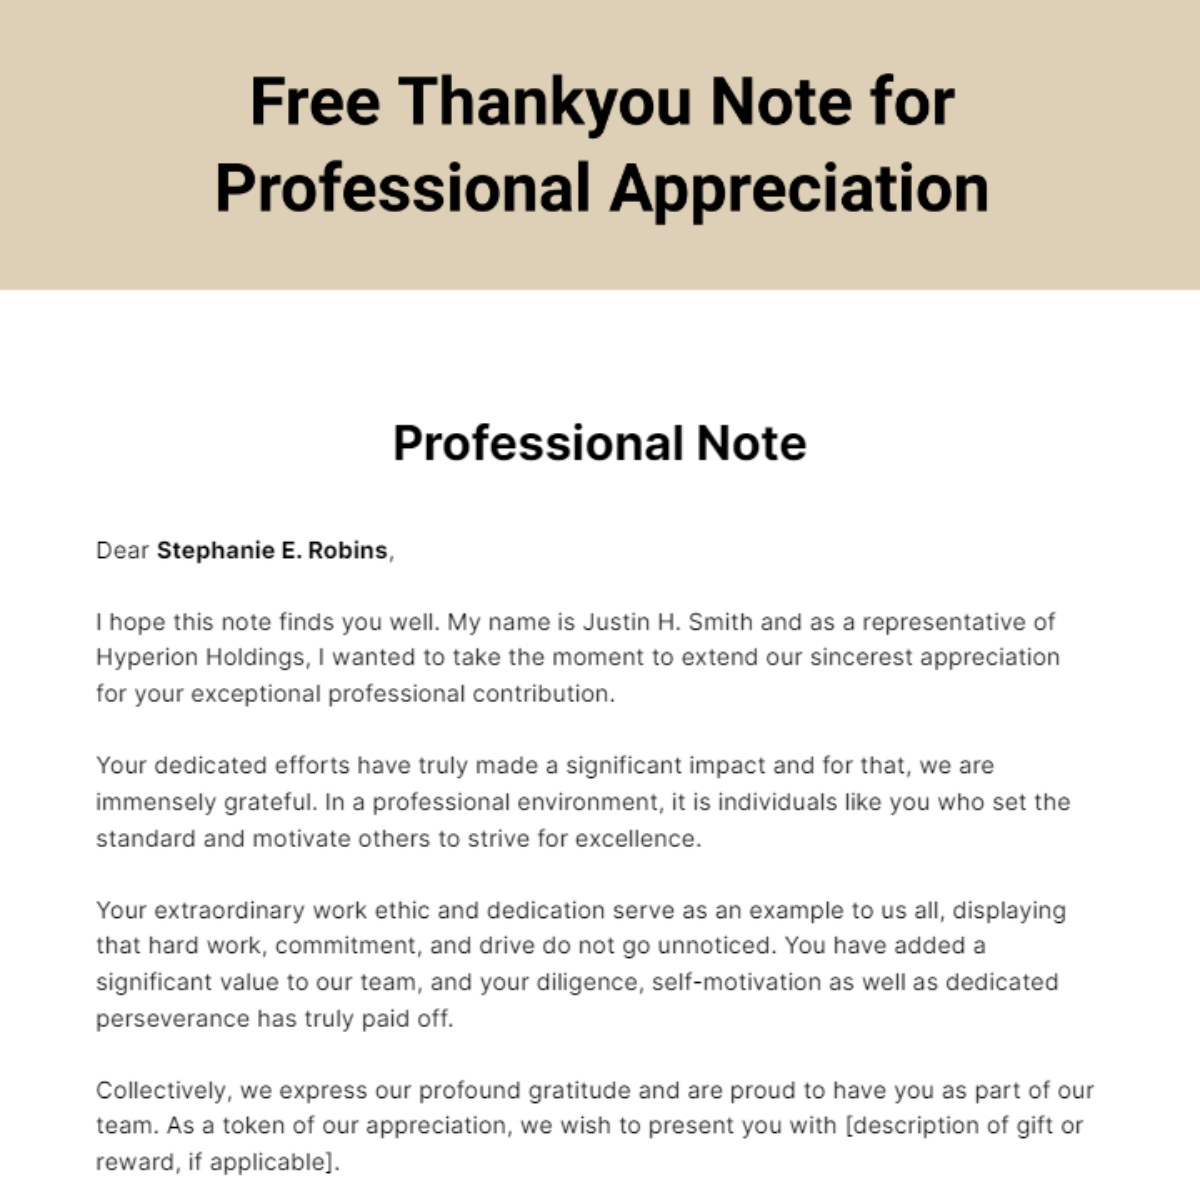 Thankyou Note for Professional Appreciation Template